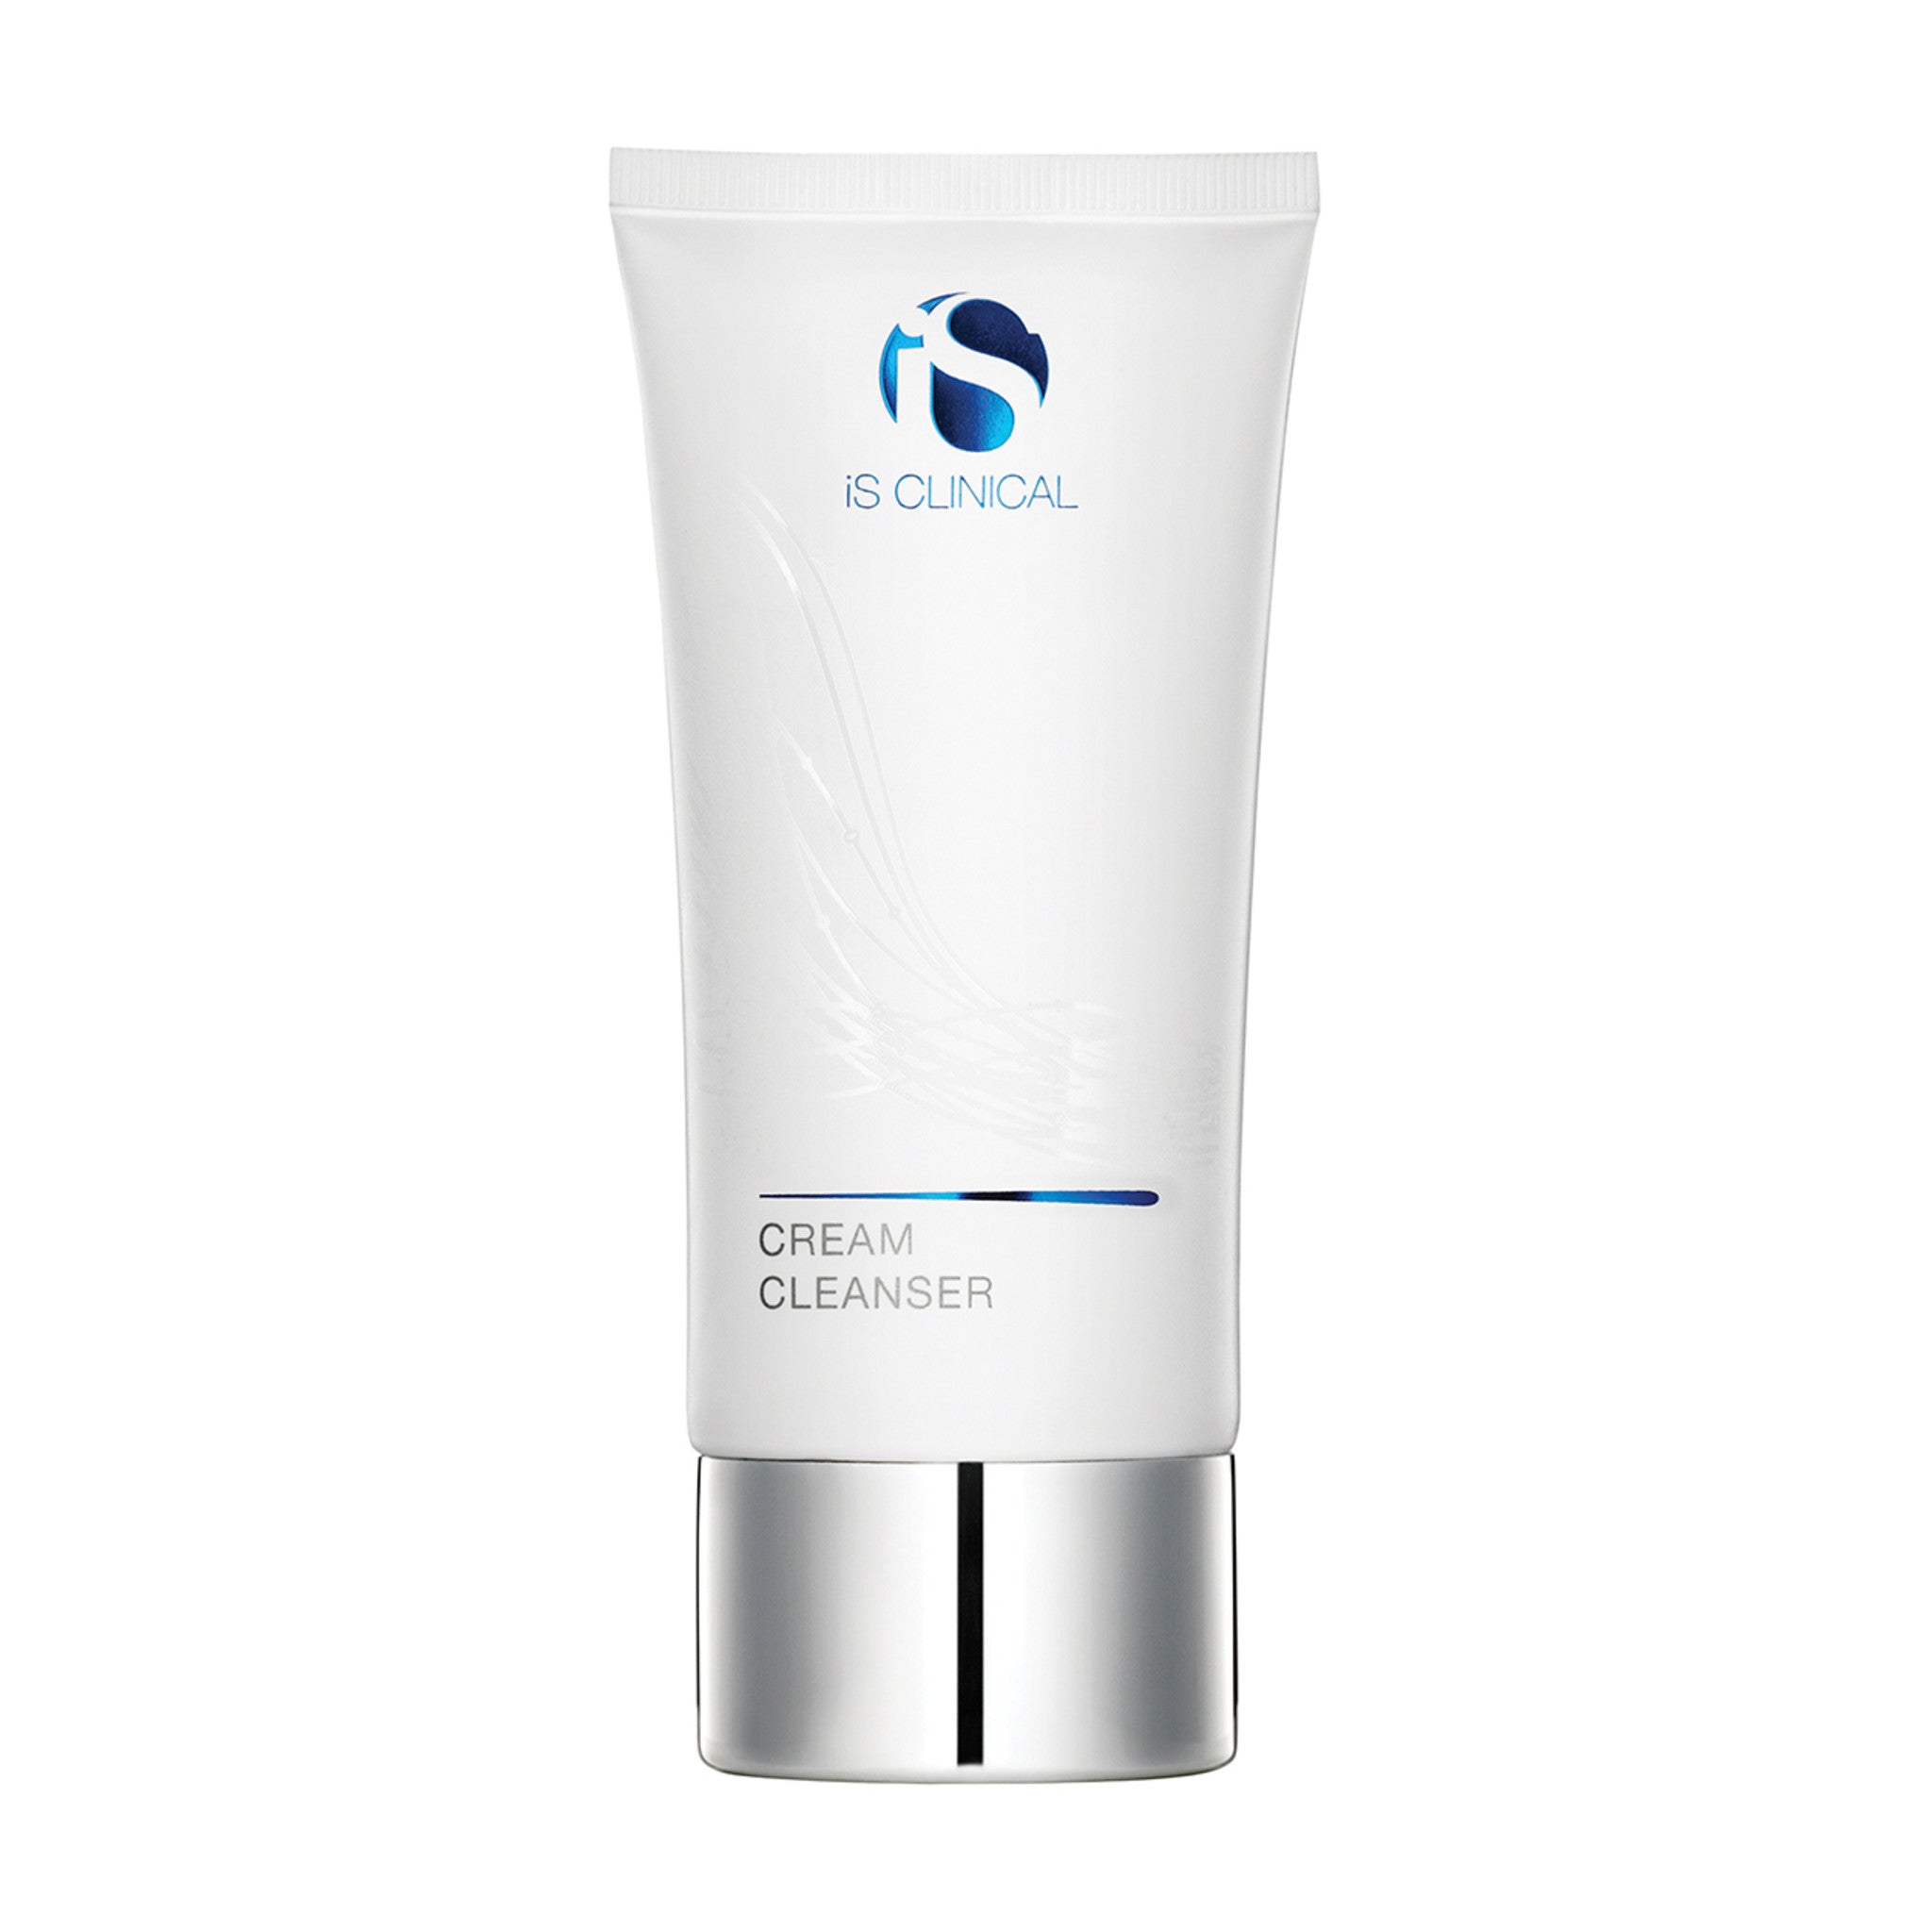 IS Clinical Cream Cleanser main image.